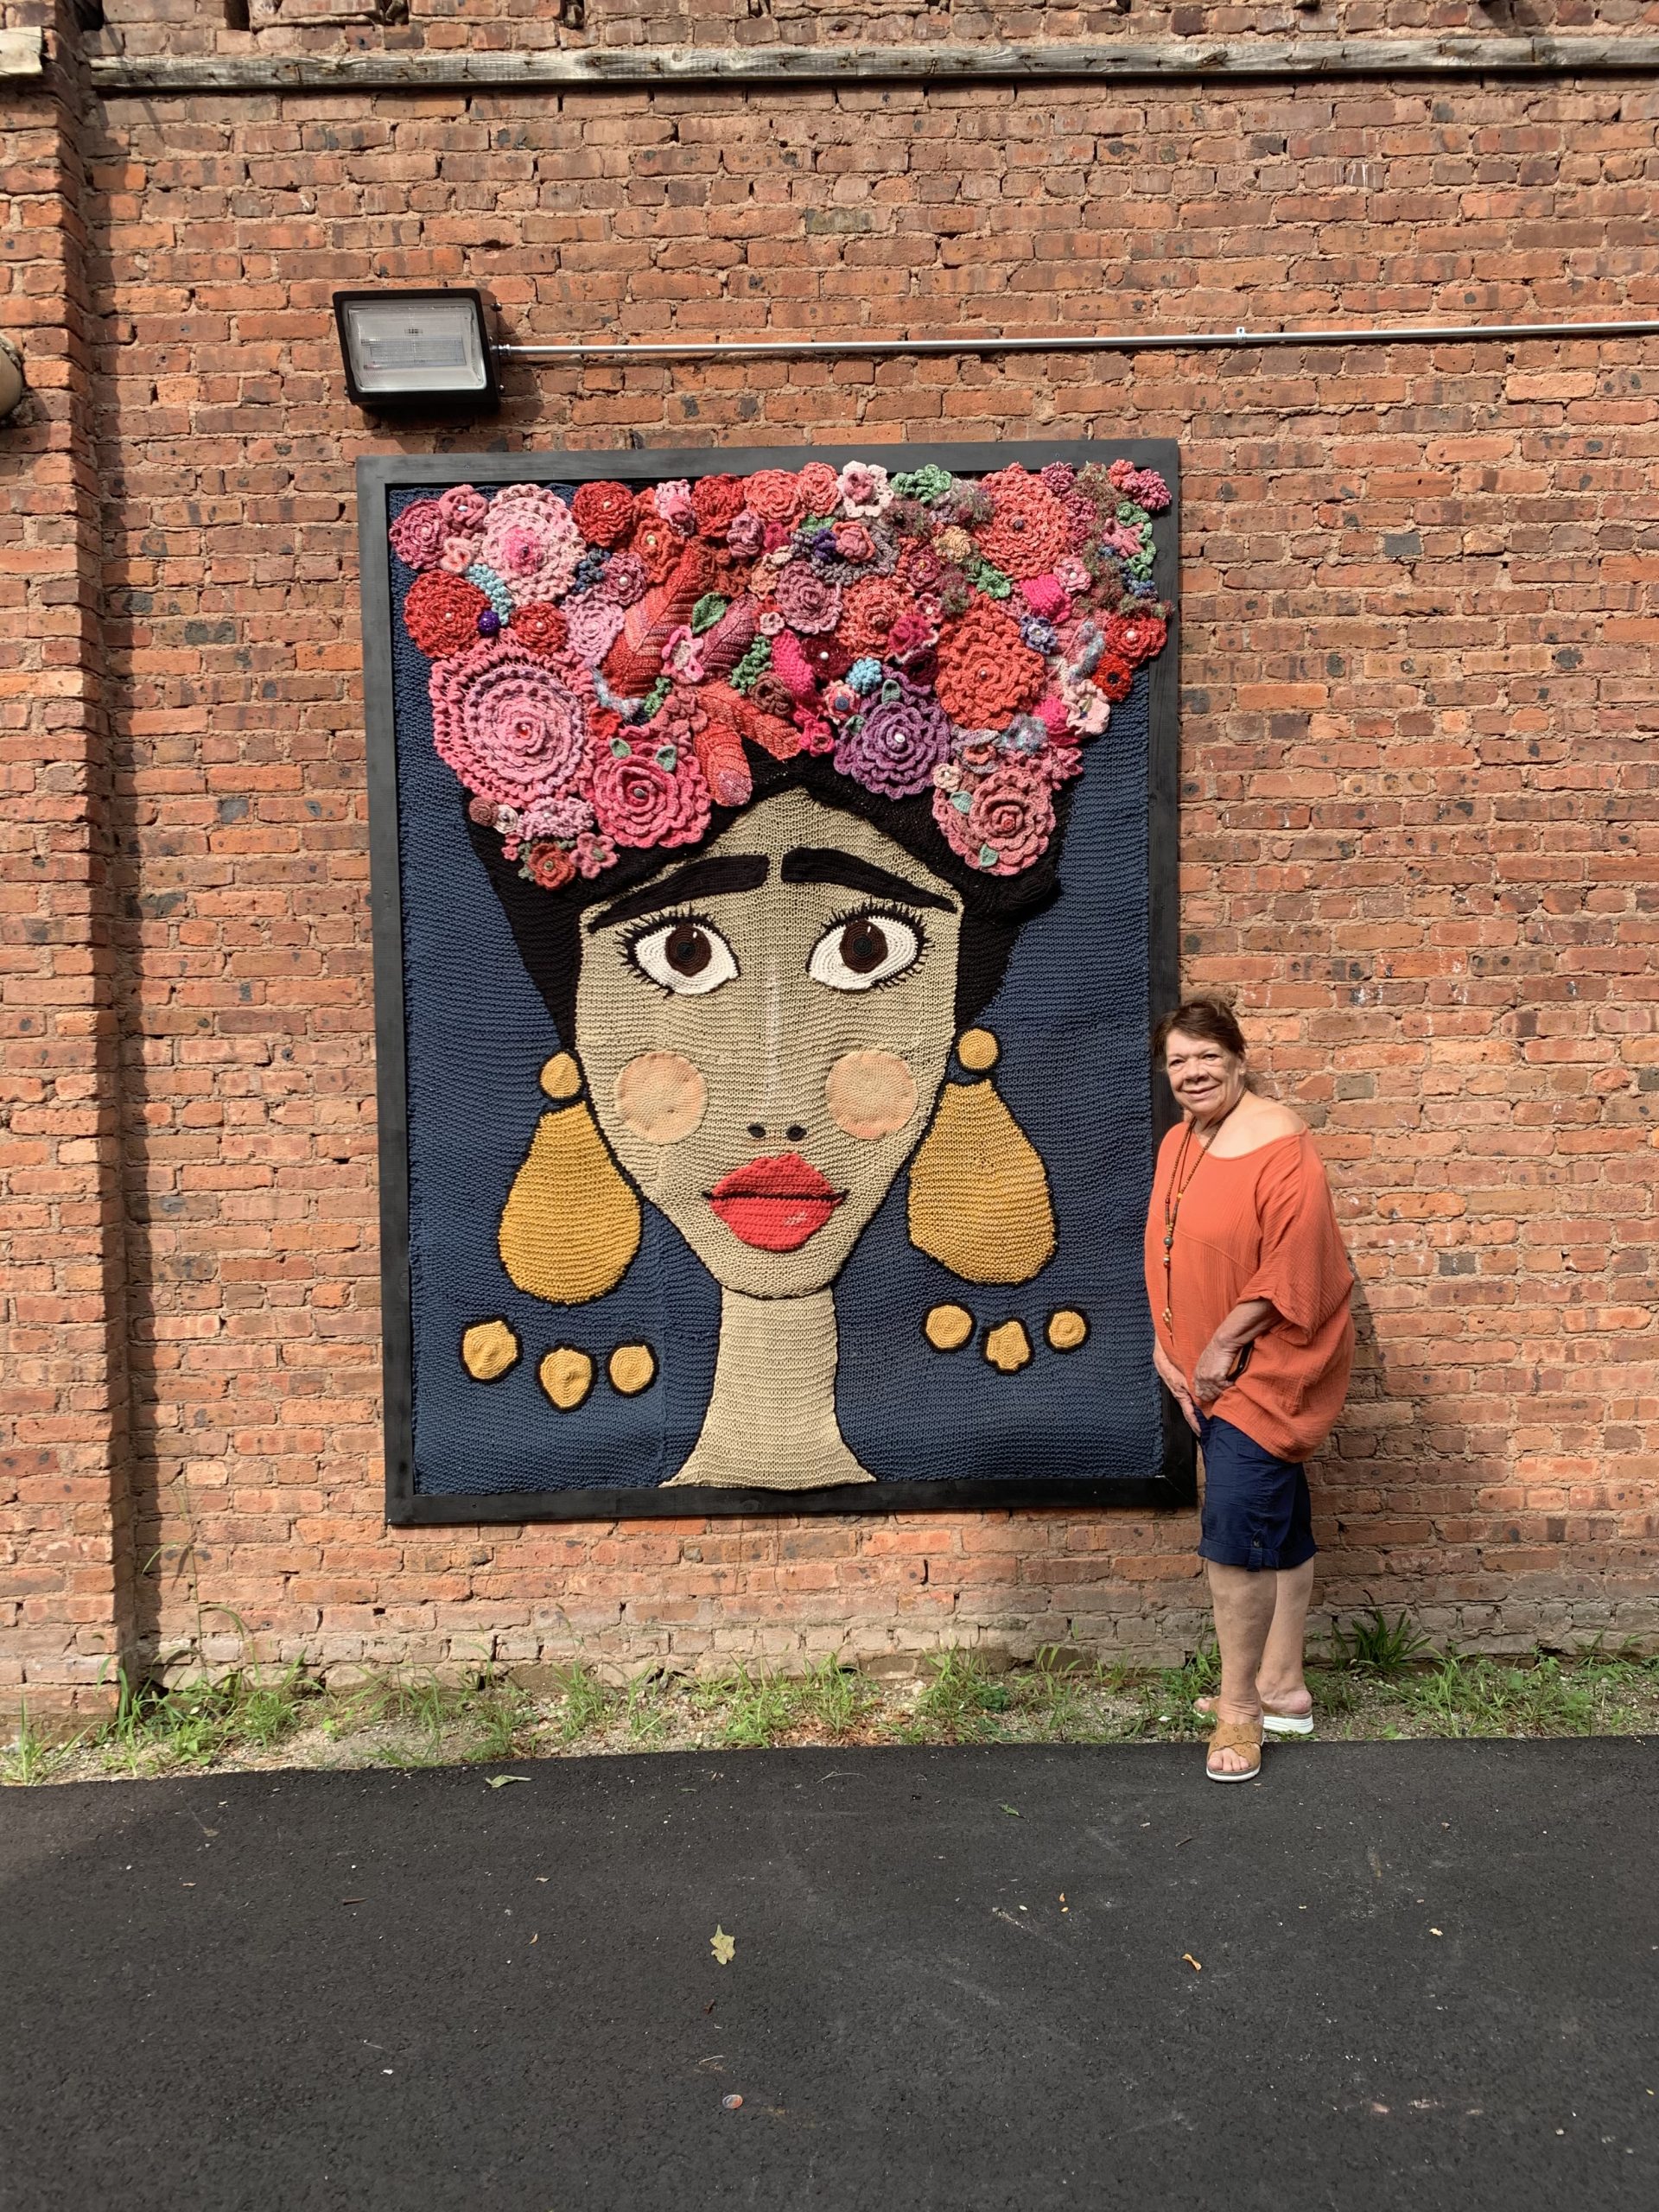 Yarn artist Linda Grant poses with one of her creations in Paseo Alleyway, where the City of Rahway added additional outdoor seating. Image credit: The RA+BP